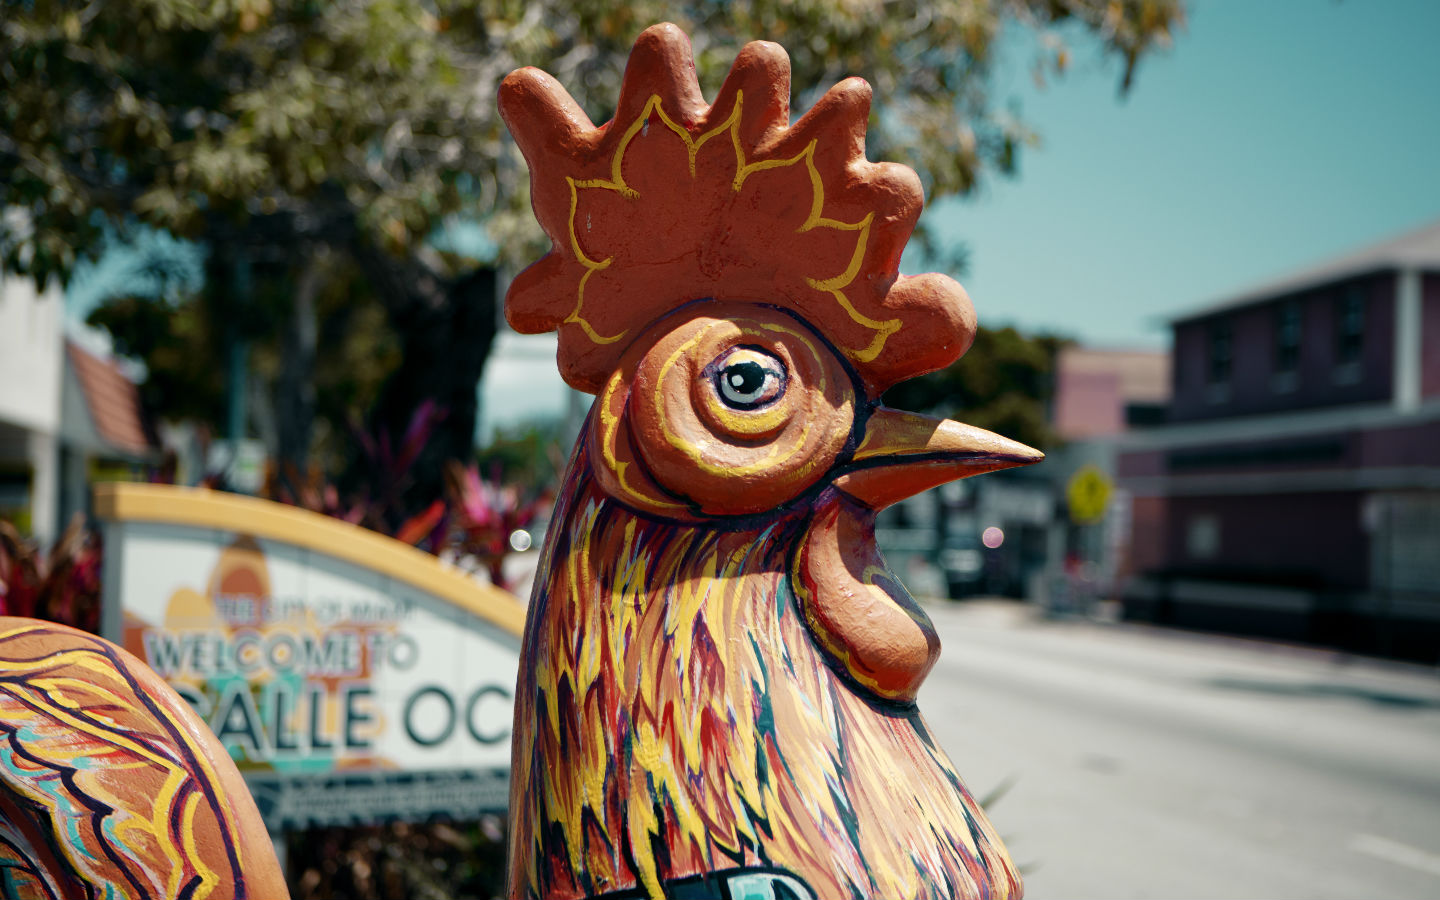 Colorful rooster sculpture on Calle Ocho in Little Havana